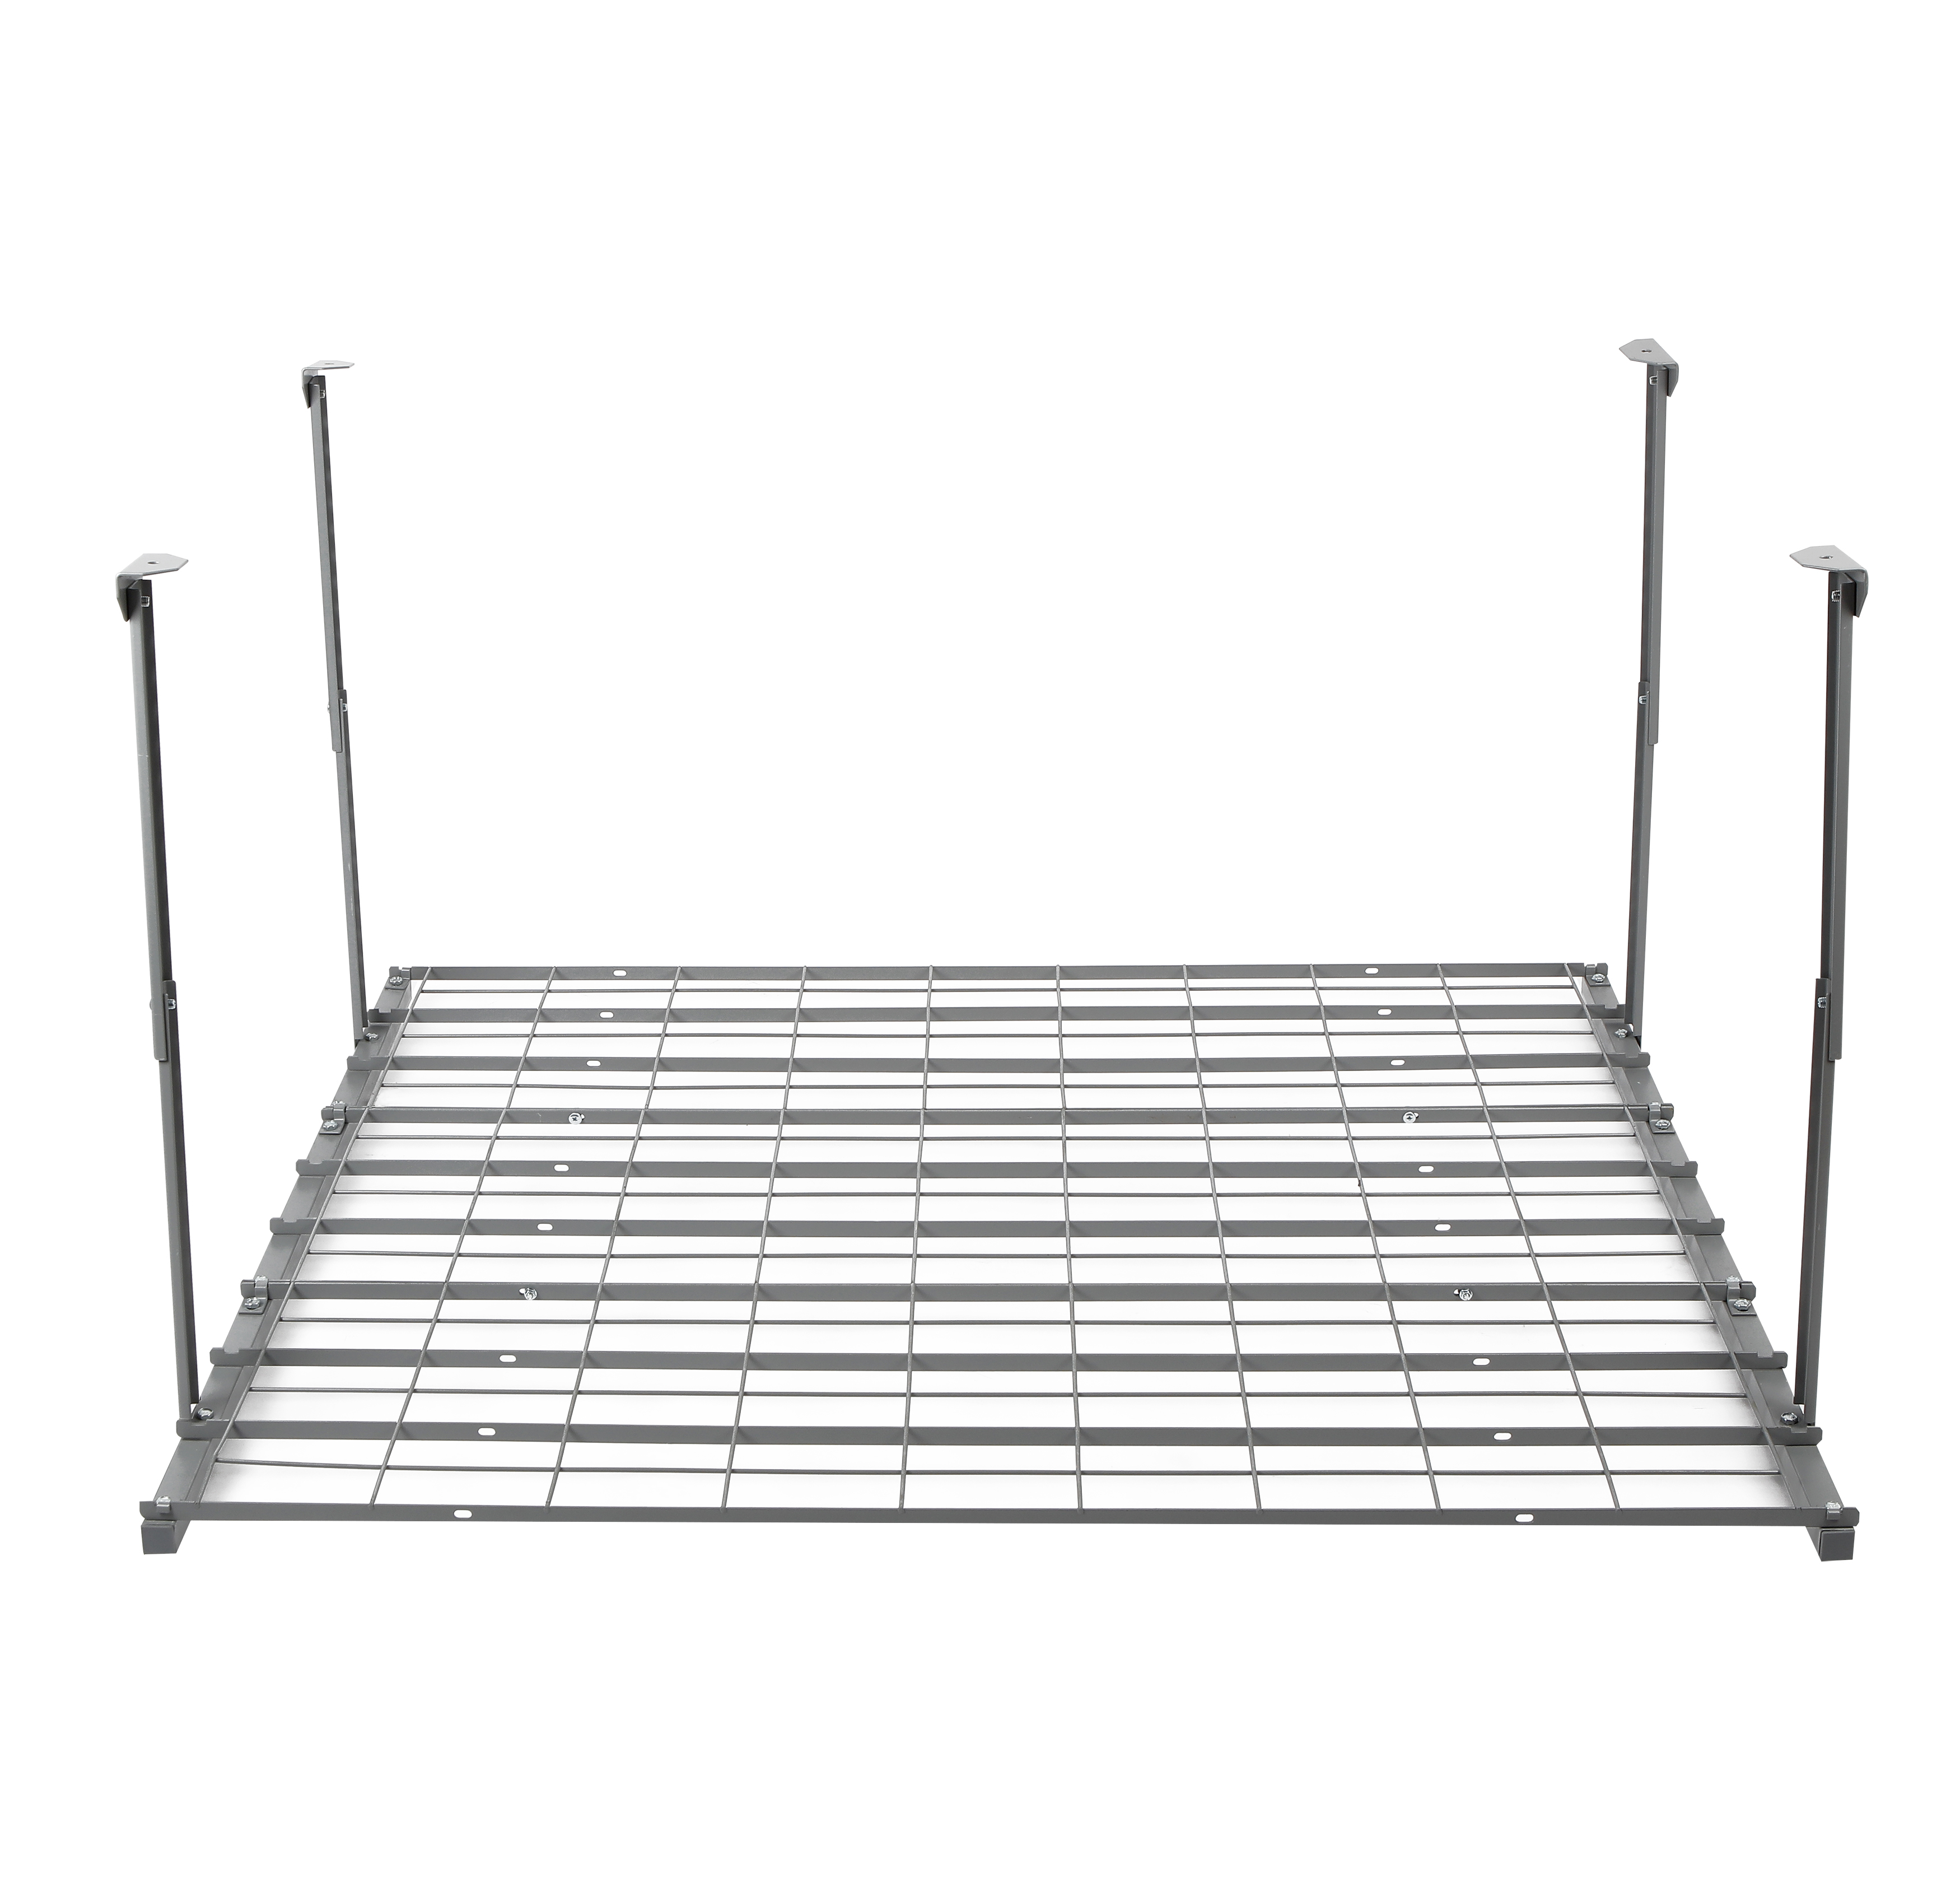 WORKPRO Overhead Garage Ceiling Rack, 48"L x 42"W x 28"H, Silver, 24' - image 1 of 10